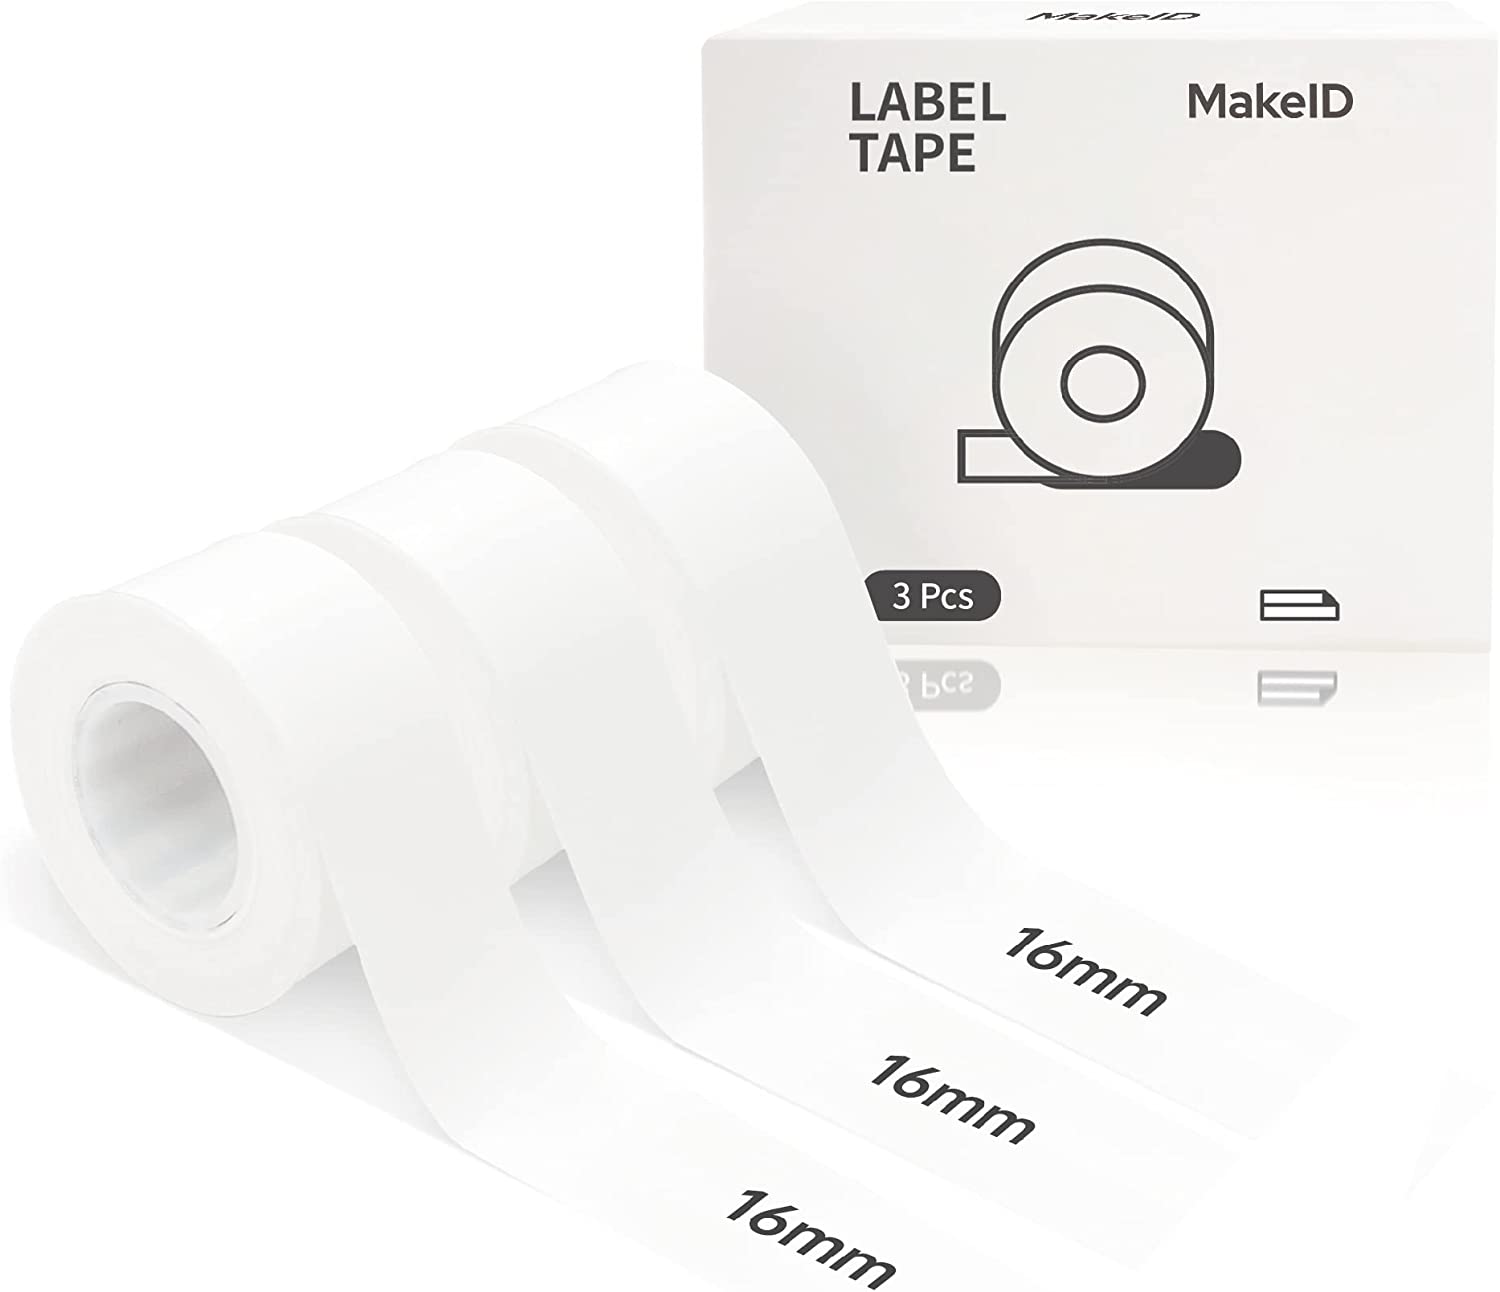 Makeid White Label Maker Tape adapted Label Print Paper Refills Standard Laminated Office Labeling Tape Replacement 0.63 x 157 inch (16mm x 4m) Work